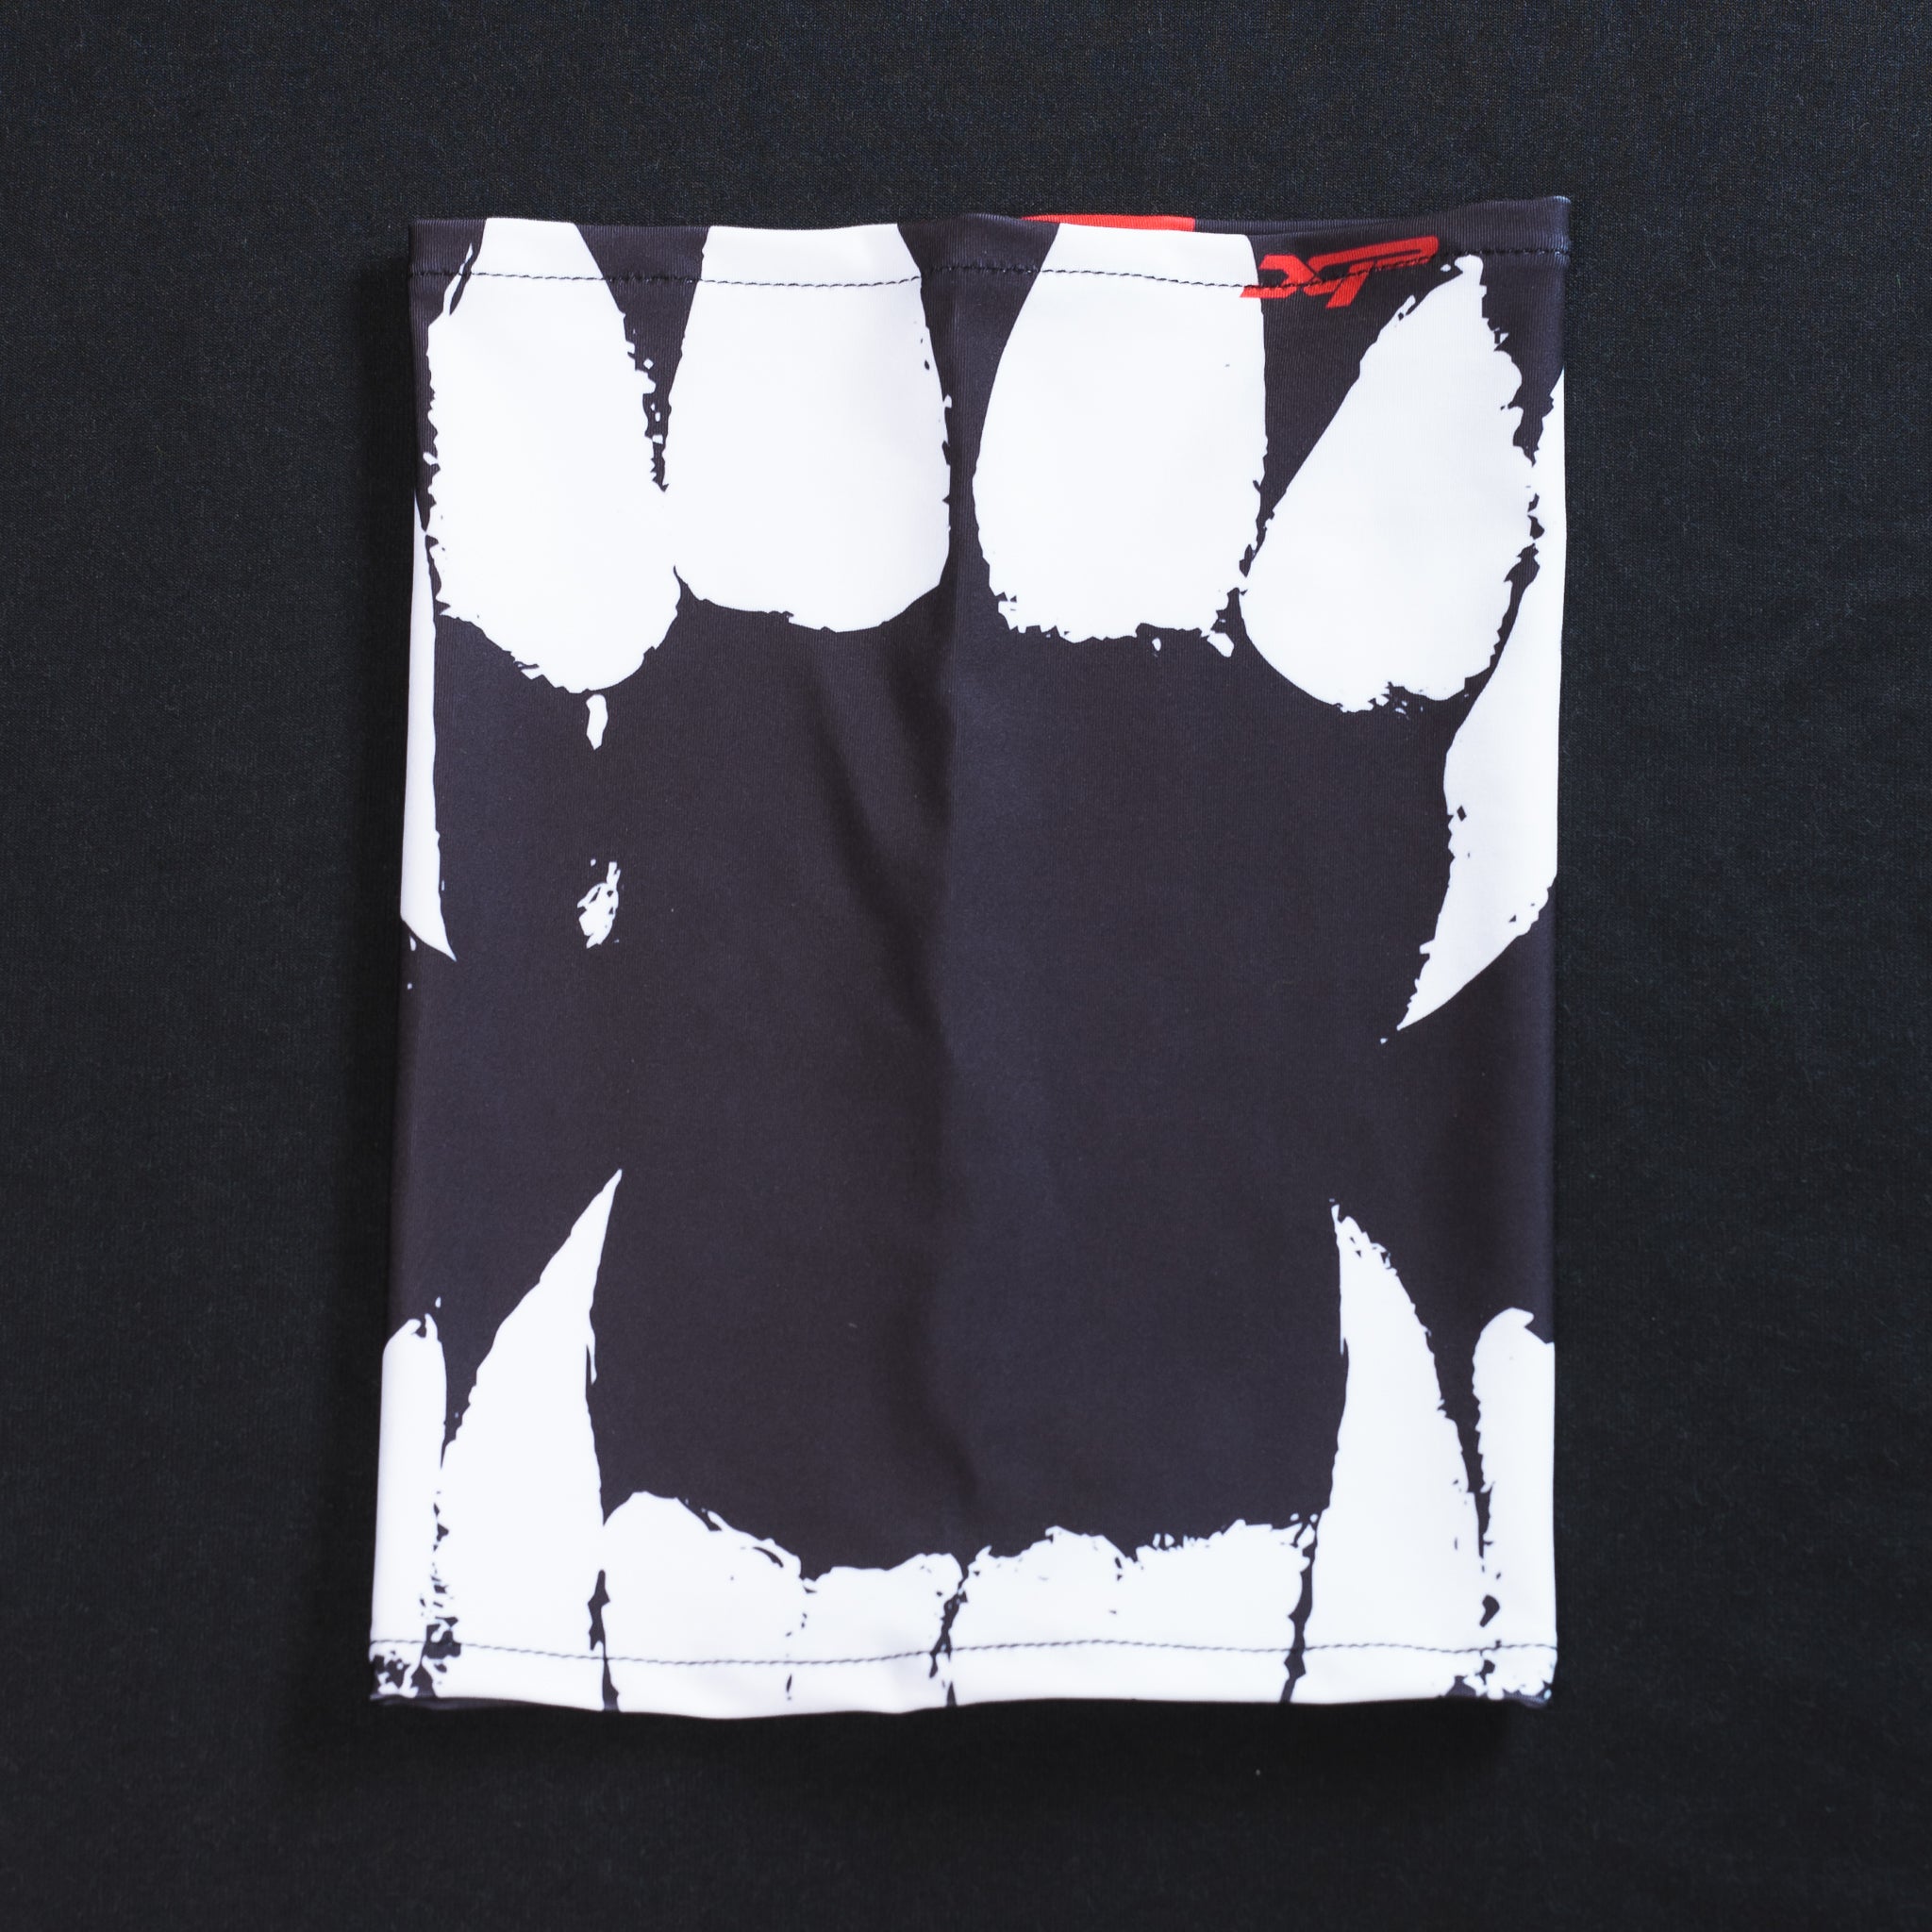 Sublimated Antimicrobial Neck Gaiter Grillz Xtreme Pro Apparel